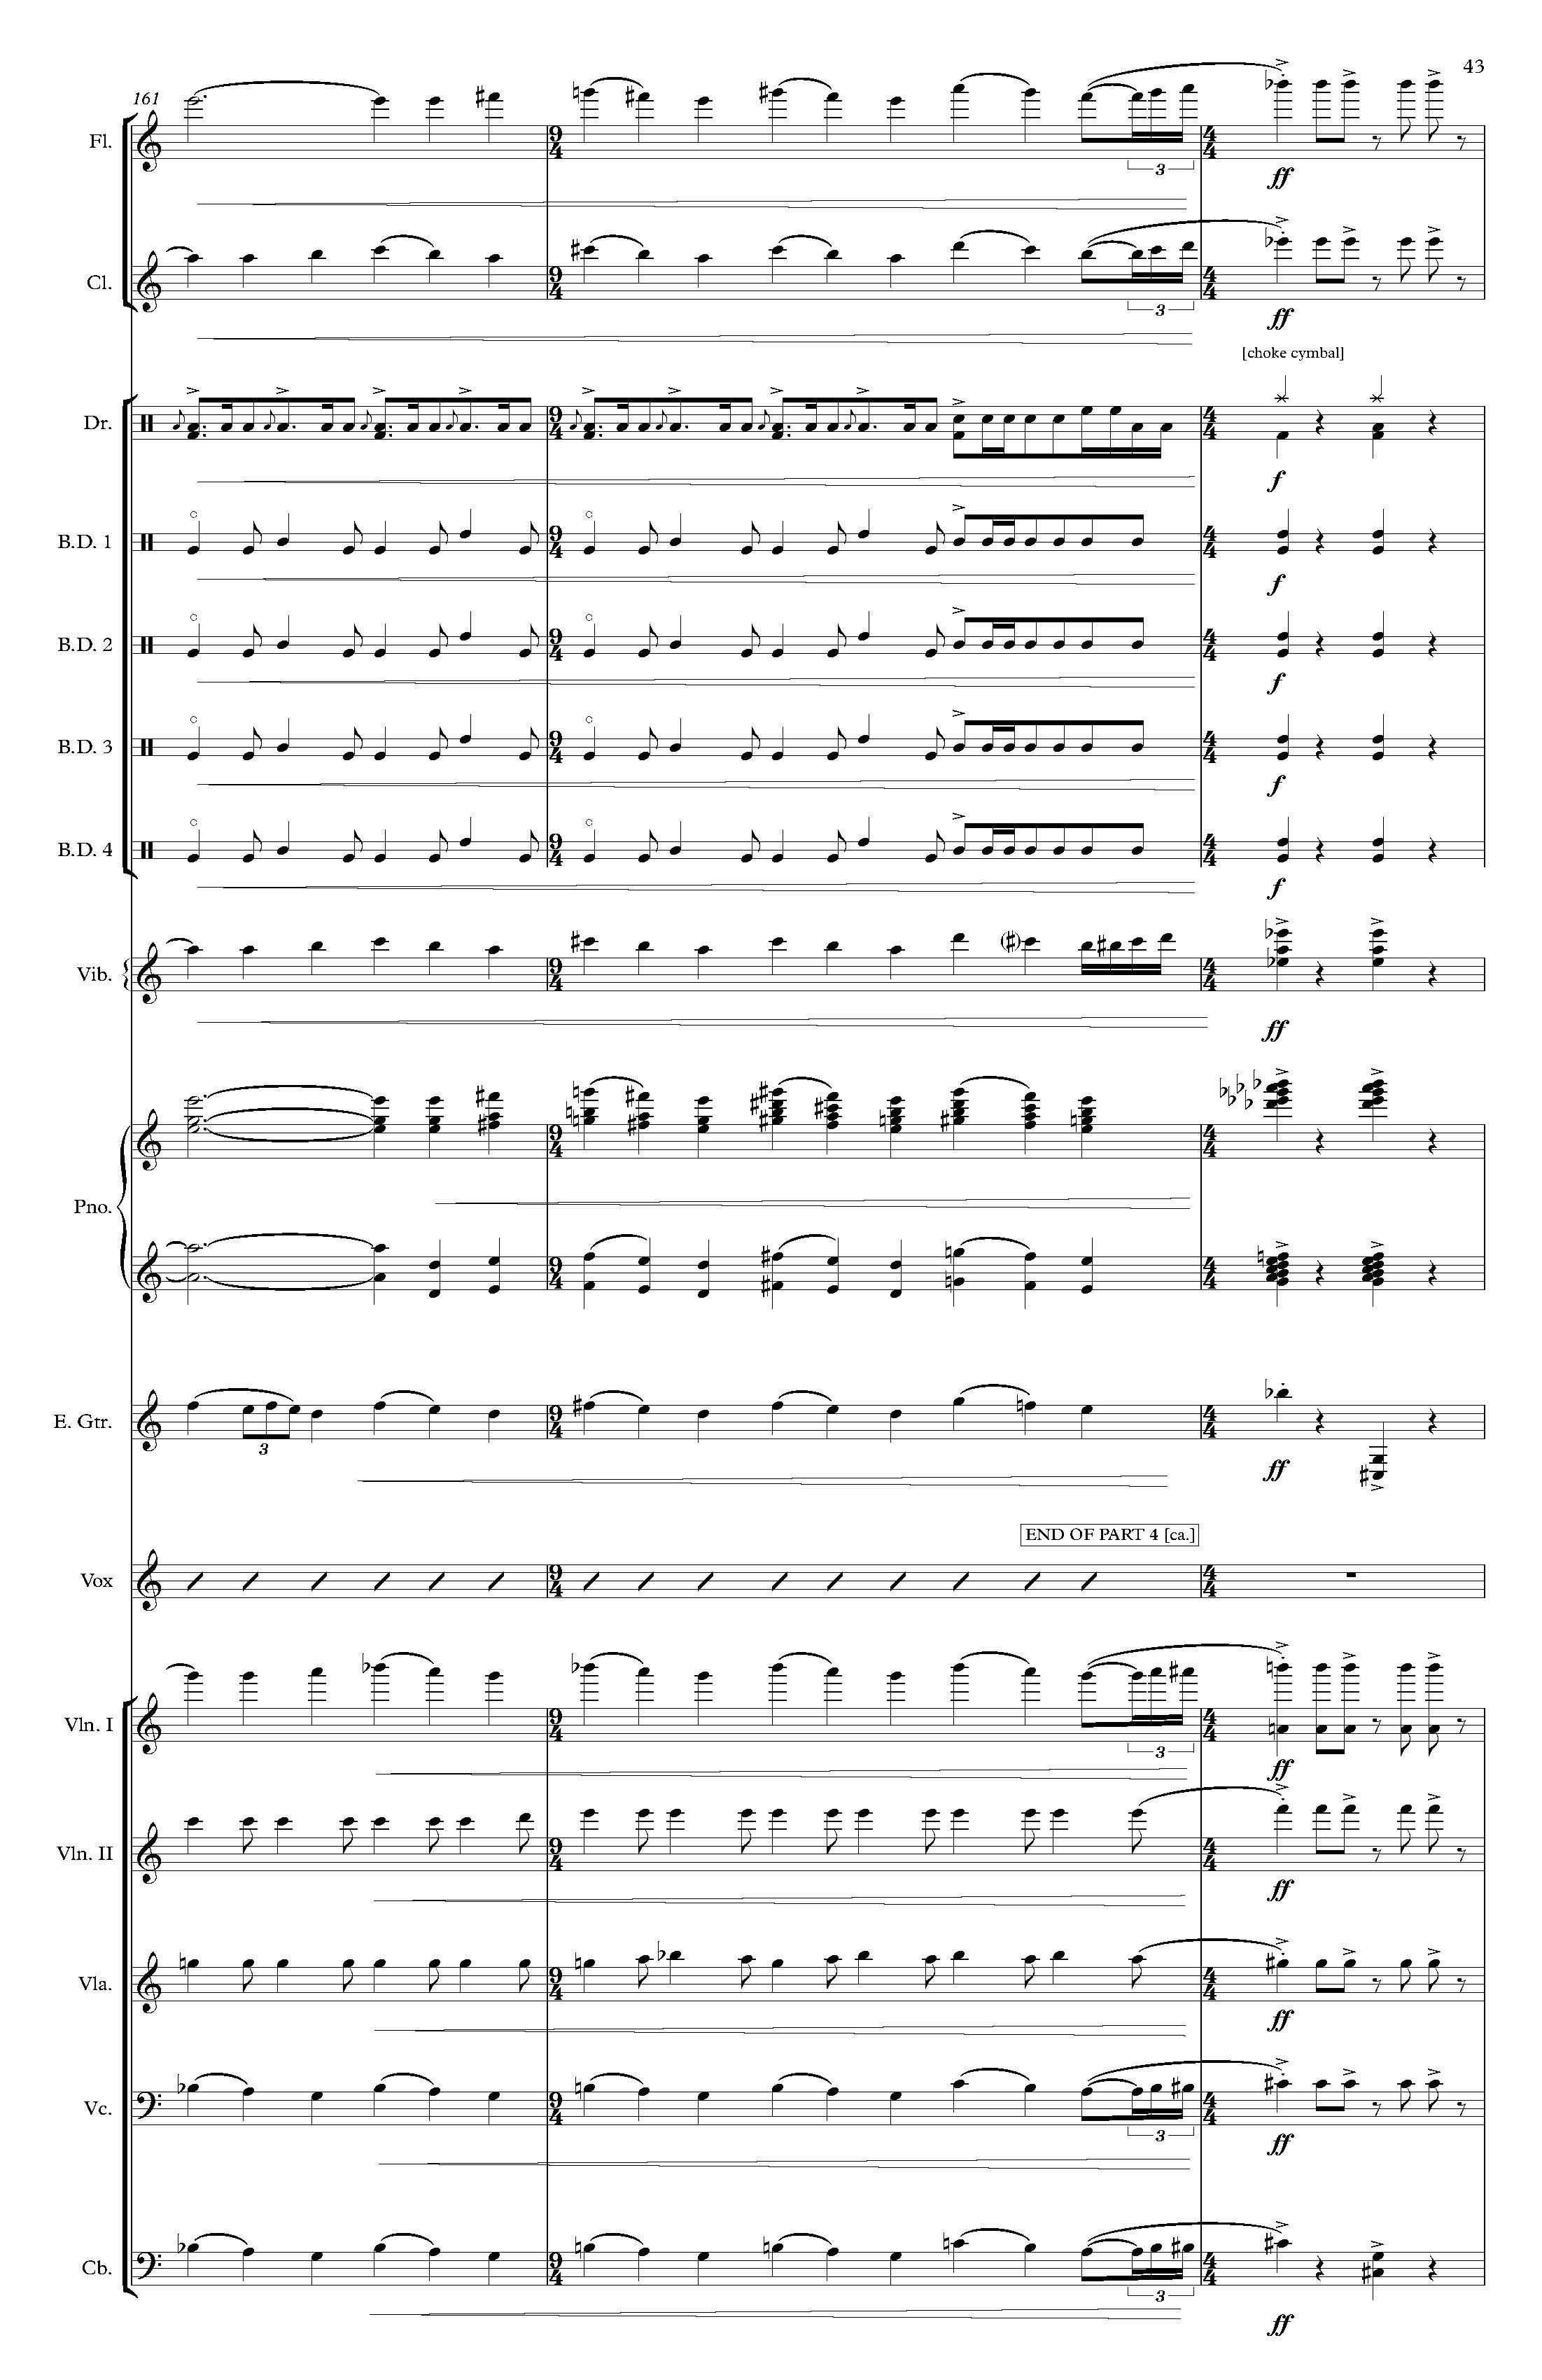 The Rembrandt of Avenue A - Complete Score_Page_49.jpg